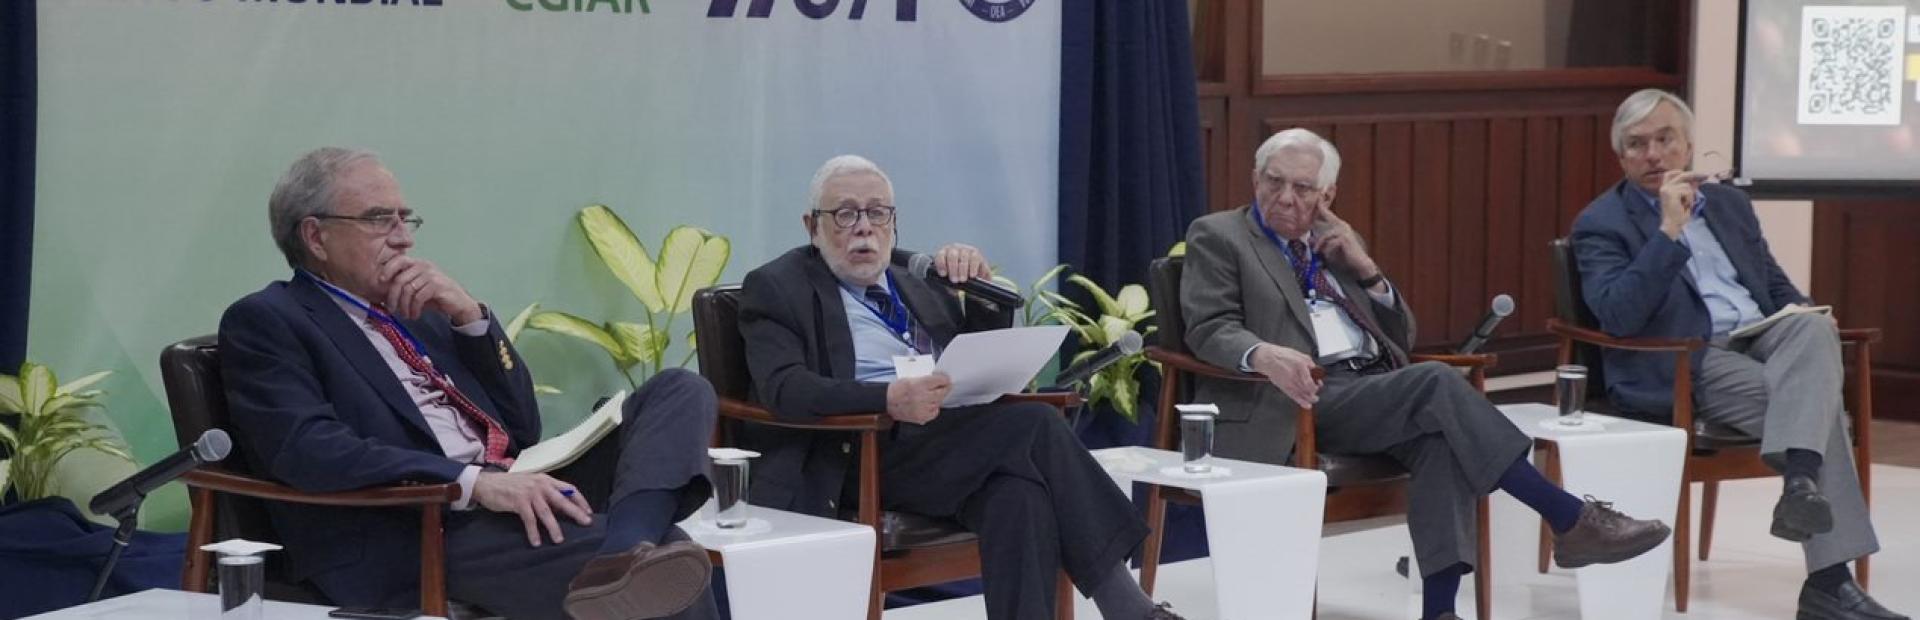 Organized by IICA, CGIAR and the World Bank, the meeting was held over the course of two days at IICA Headquarters, with the participation of more than 100 authorities and international experts. Eugenio Díaz Bonilla, Eduardo Trigo, Martín Piñeiro and Rubén Echeverría took part in the dialogue.